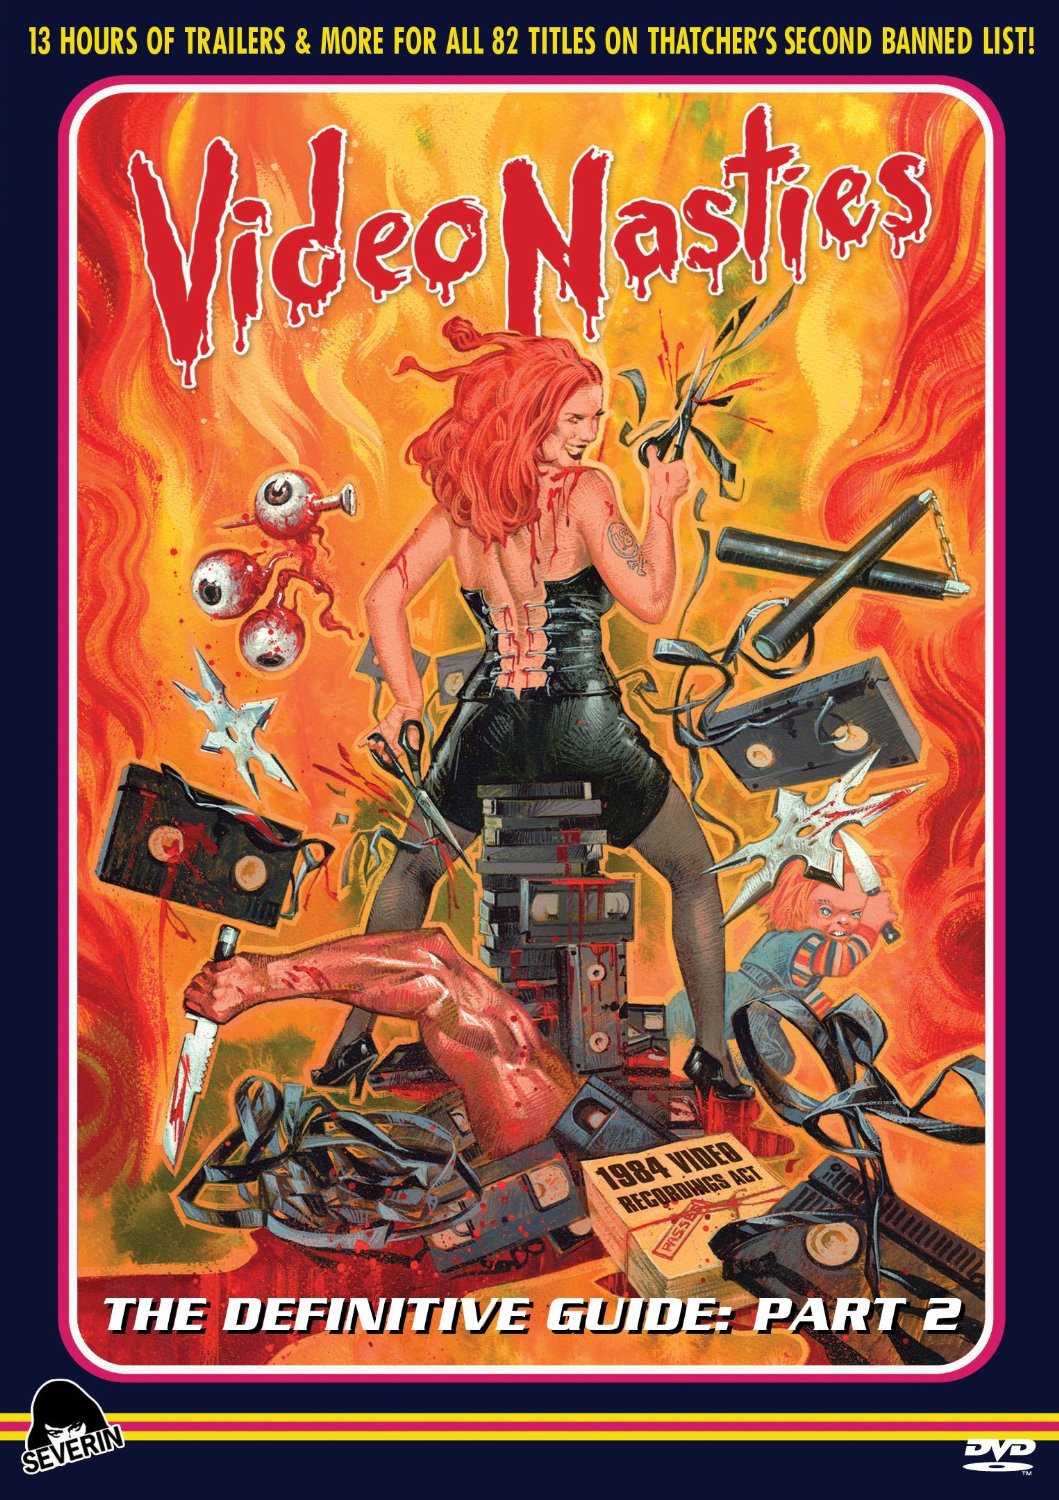 Video Nasties: The Definitive Guide Part 2 Dvd